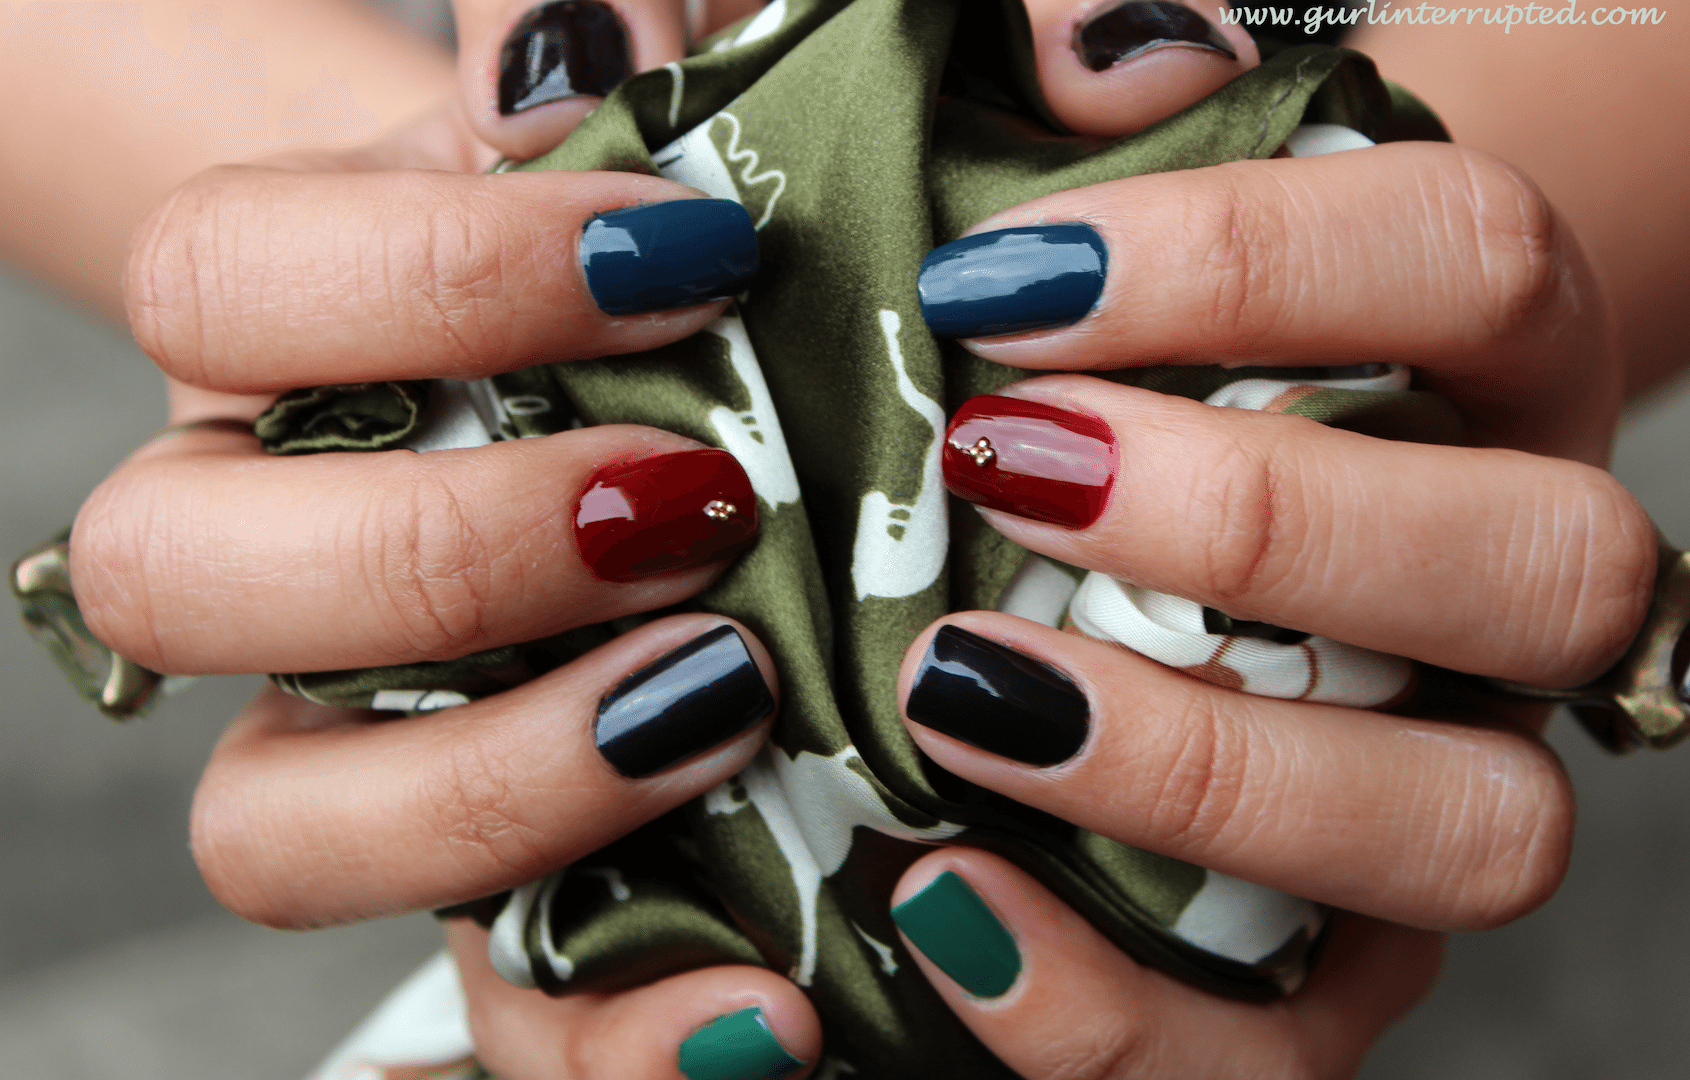 Bejewelled Nails and Jewel Tones Manicure, nails, nail polish, nail art, nail design, OPI, OPI Nail Polish NZ, beauty, beauty blog nz, fashion blog nz, style blog nz, angie fredatovich, gurlinterrupted, girl interrupted, jewels, accessories nz